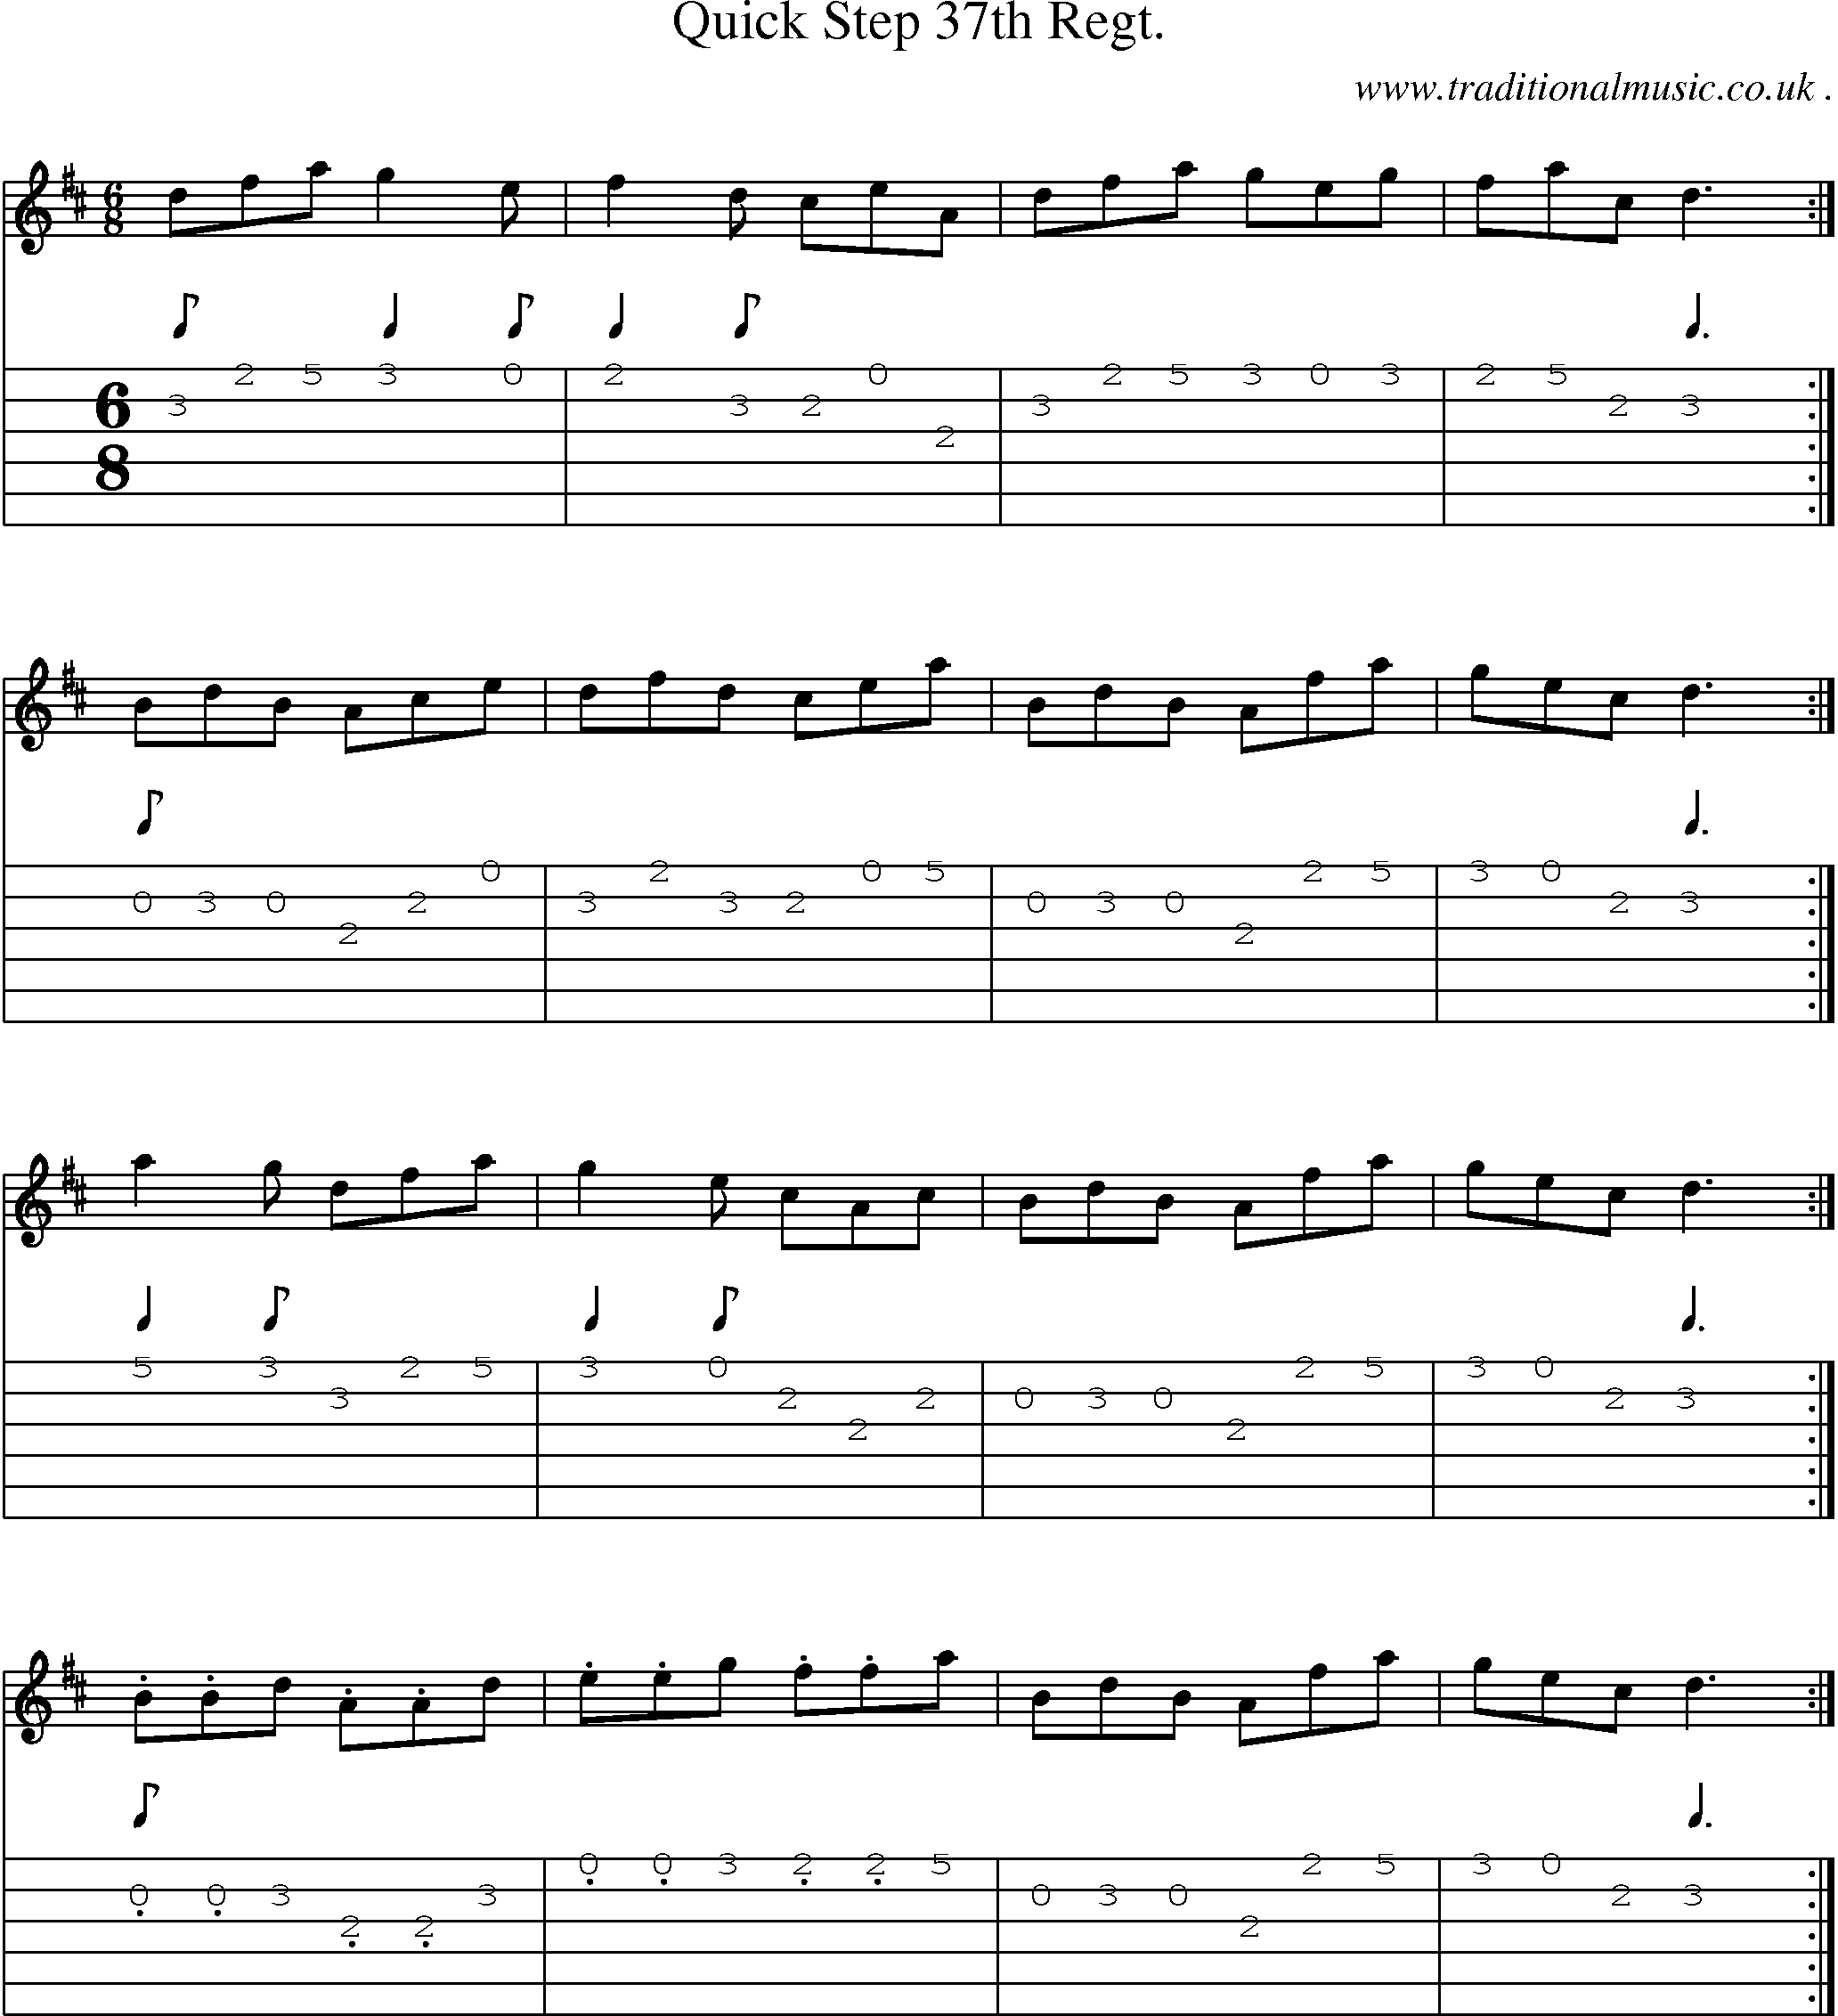 Sheet-music  score, Chords and Guitar Tabs for Quick Step 37th Regt